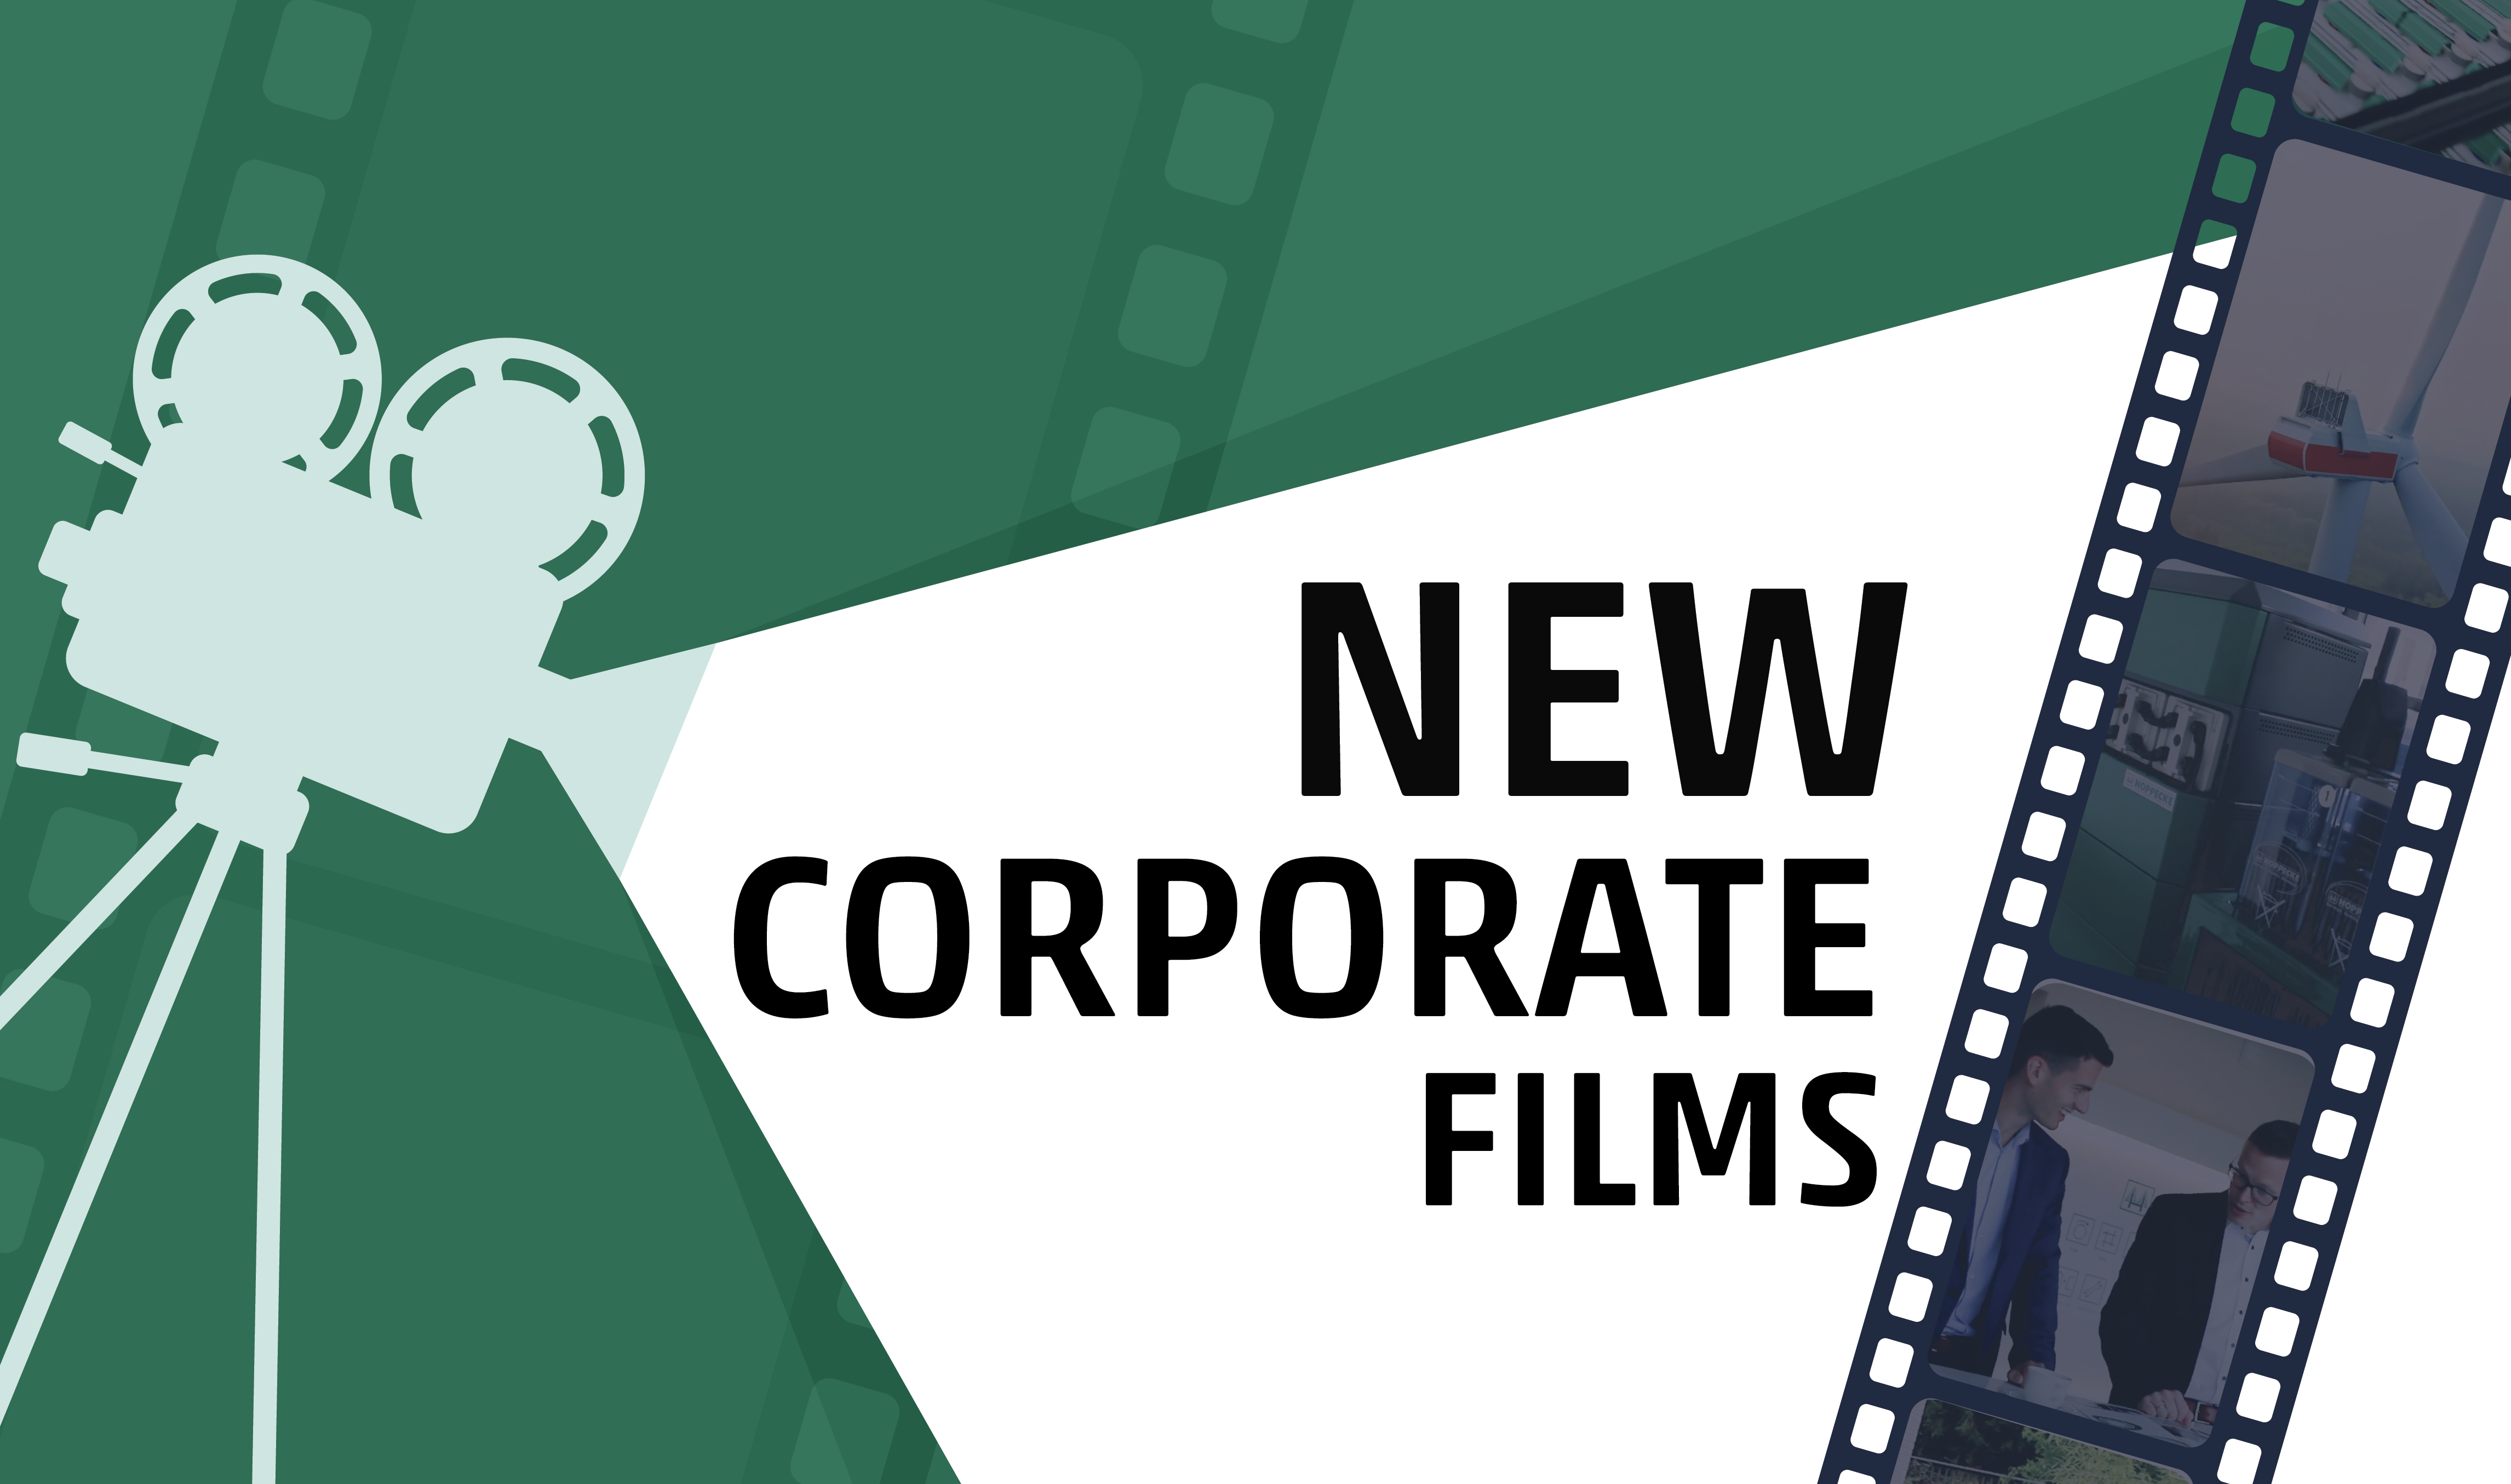 Learn more about the new HOPPECKE Corporate film 